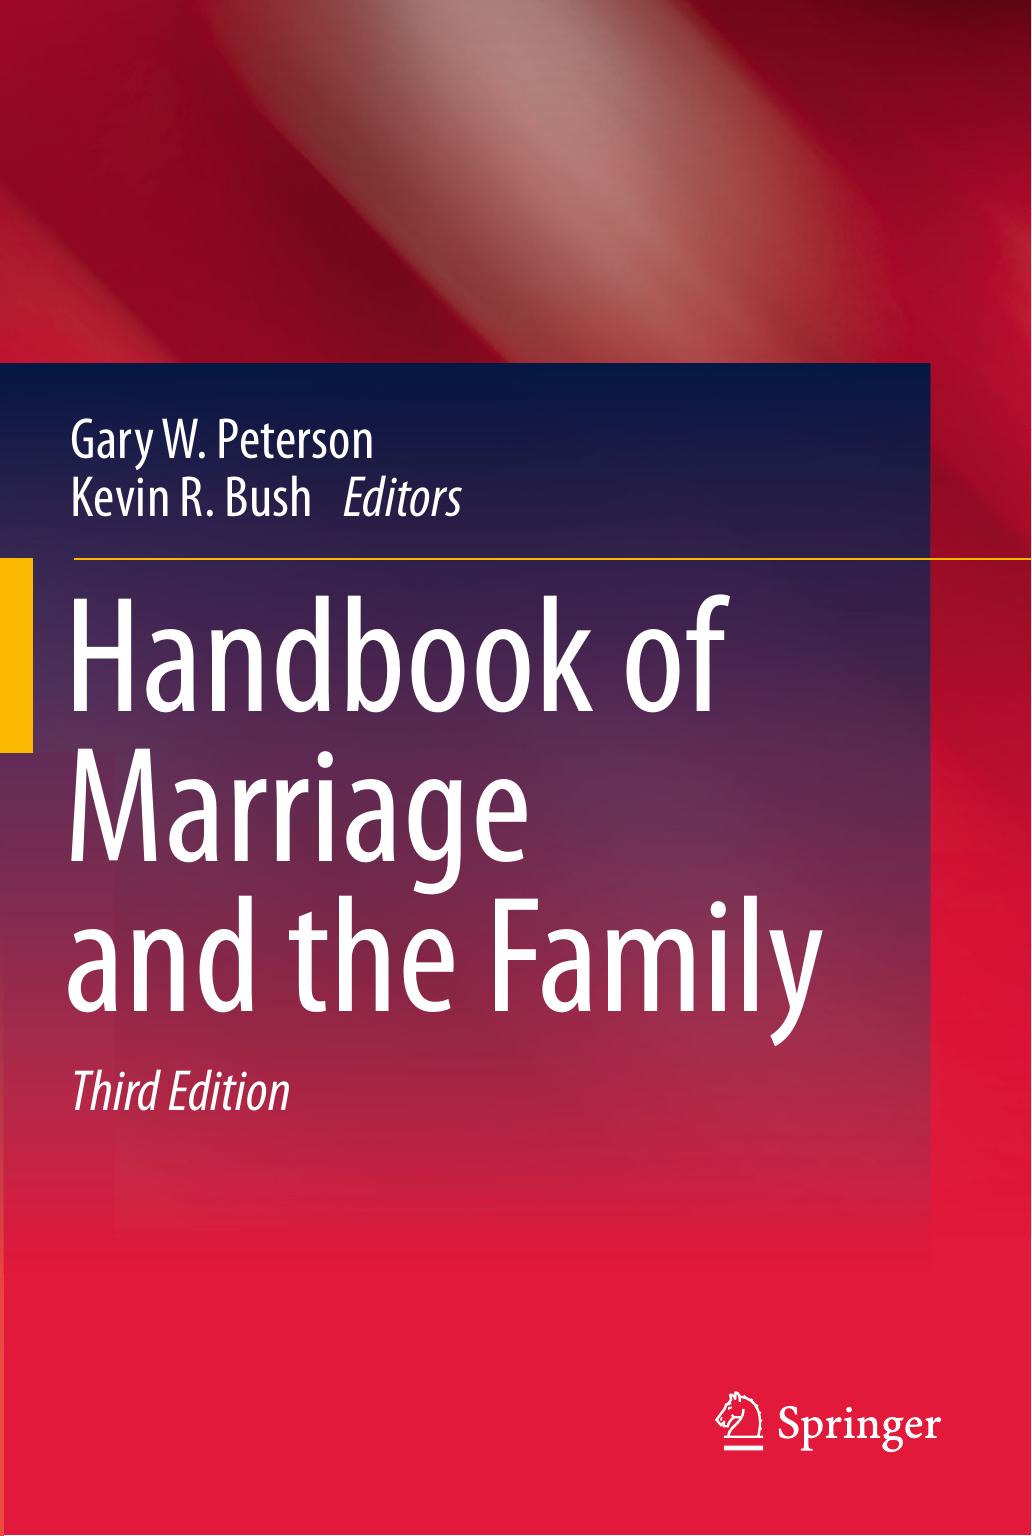 Handbook of Marriage and the Family by Gary W. Peterson & Kevin R. Bush